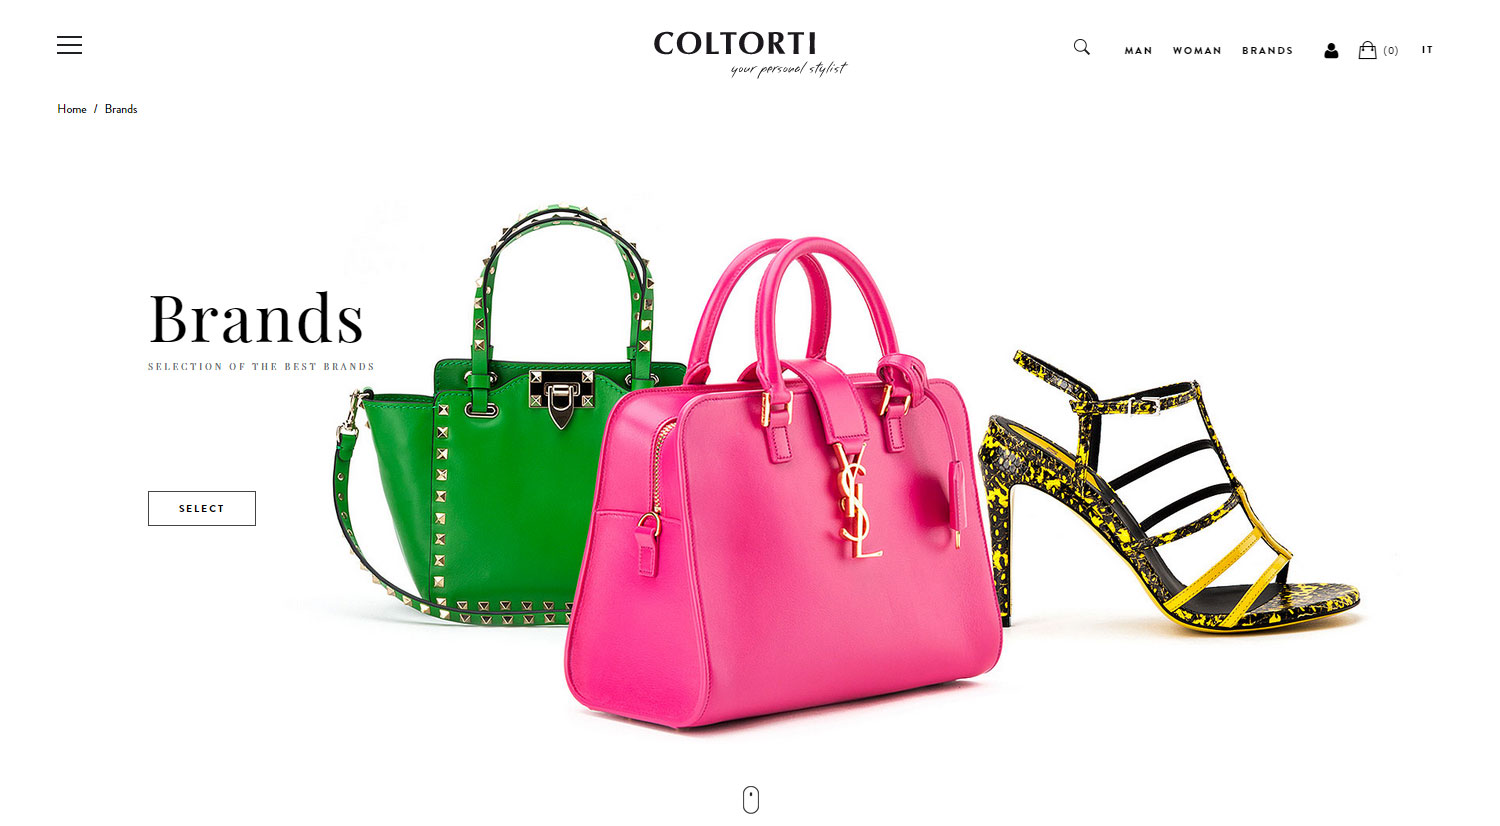 COLTORTI - Website of the Day